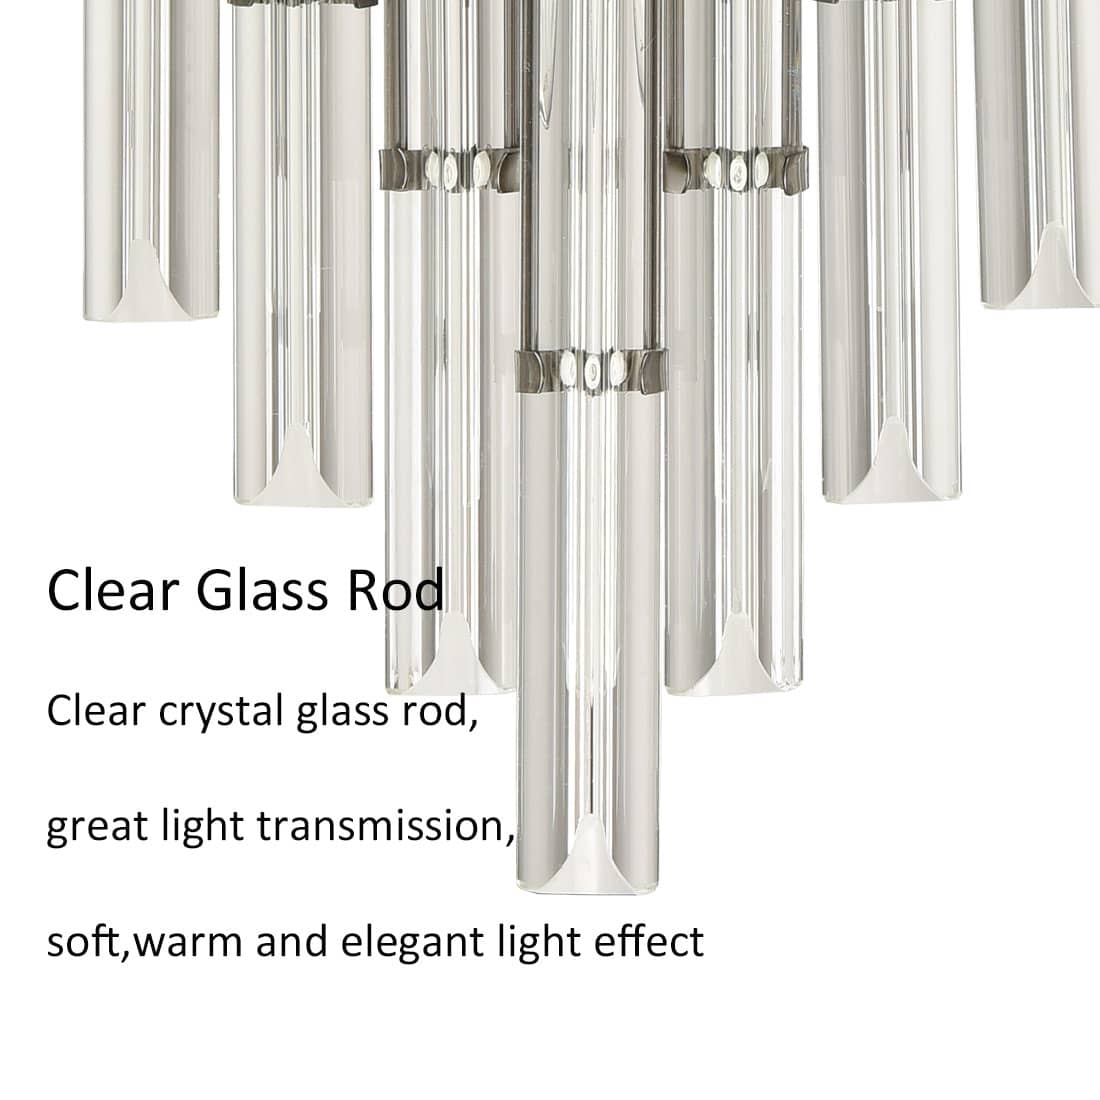 Crystal Wall Sconce Lighting for Bathroom in Black Finish